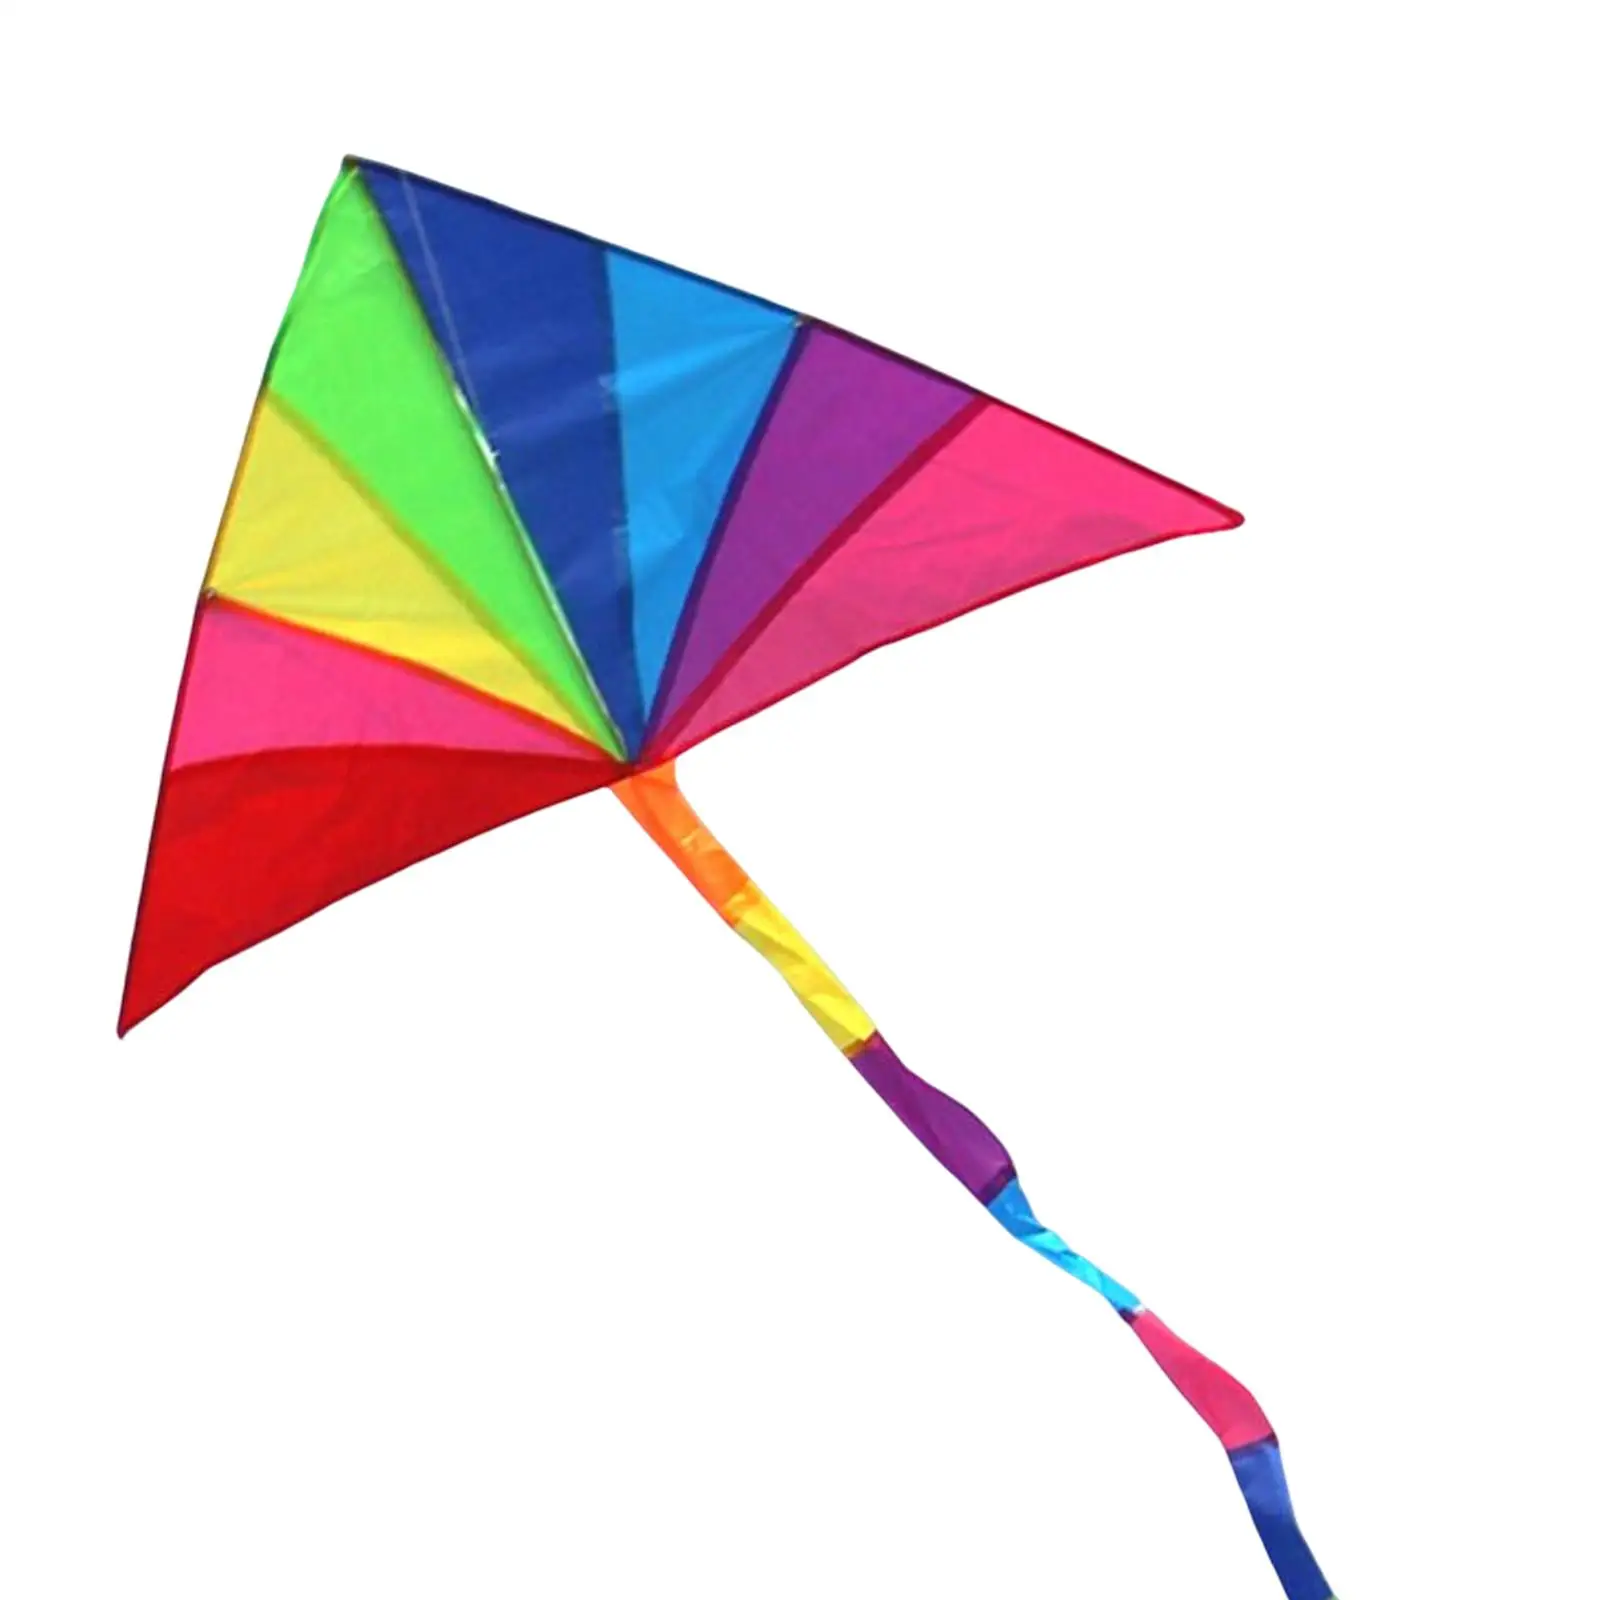 Rainbow Delta Kite Huge Windsock Easy to Fly Large Triangle Kite Park Teenagers Children and Adults